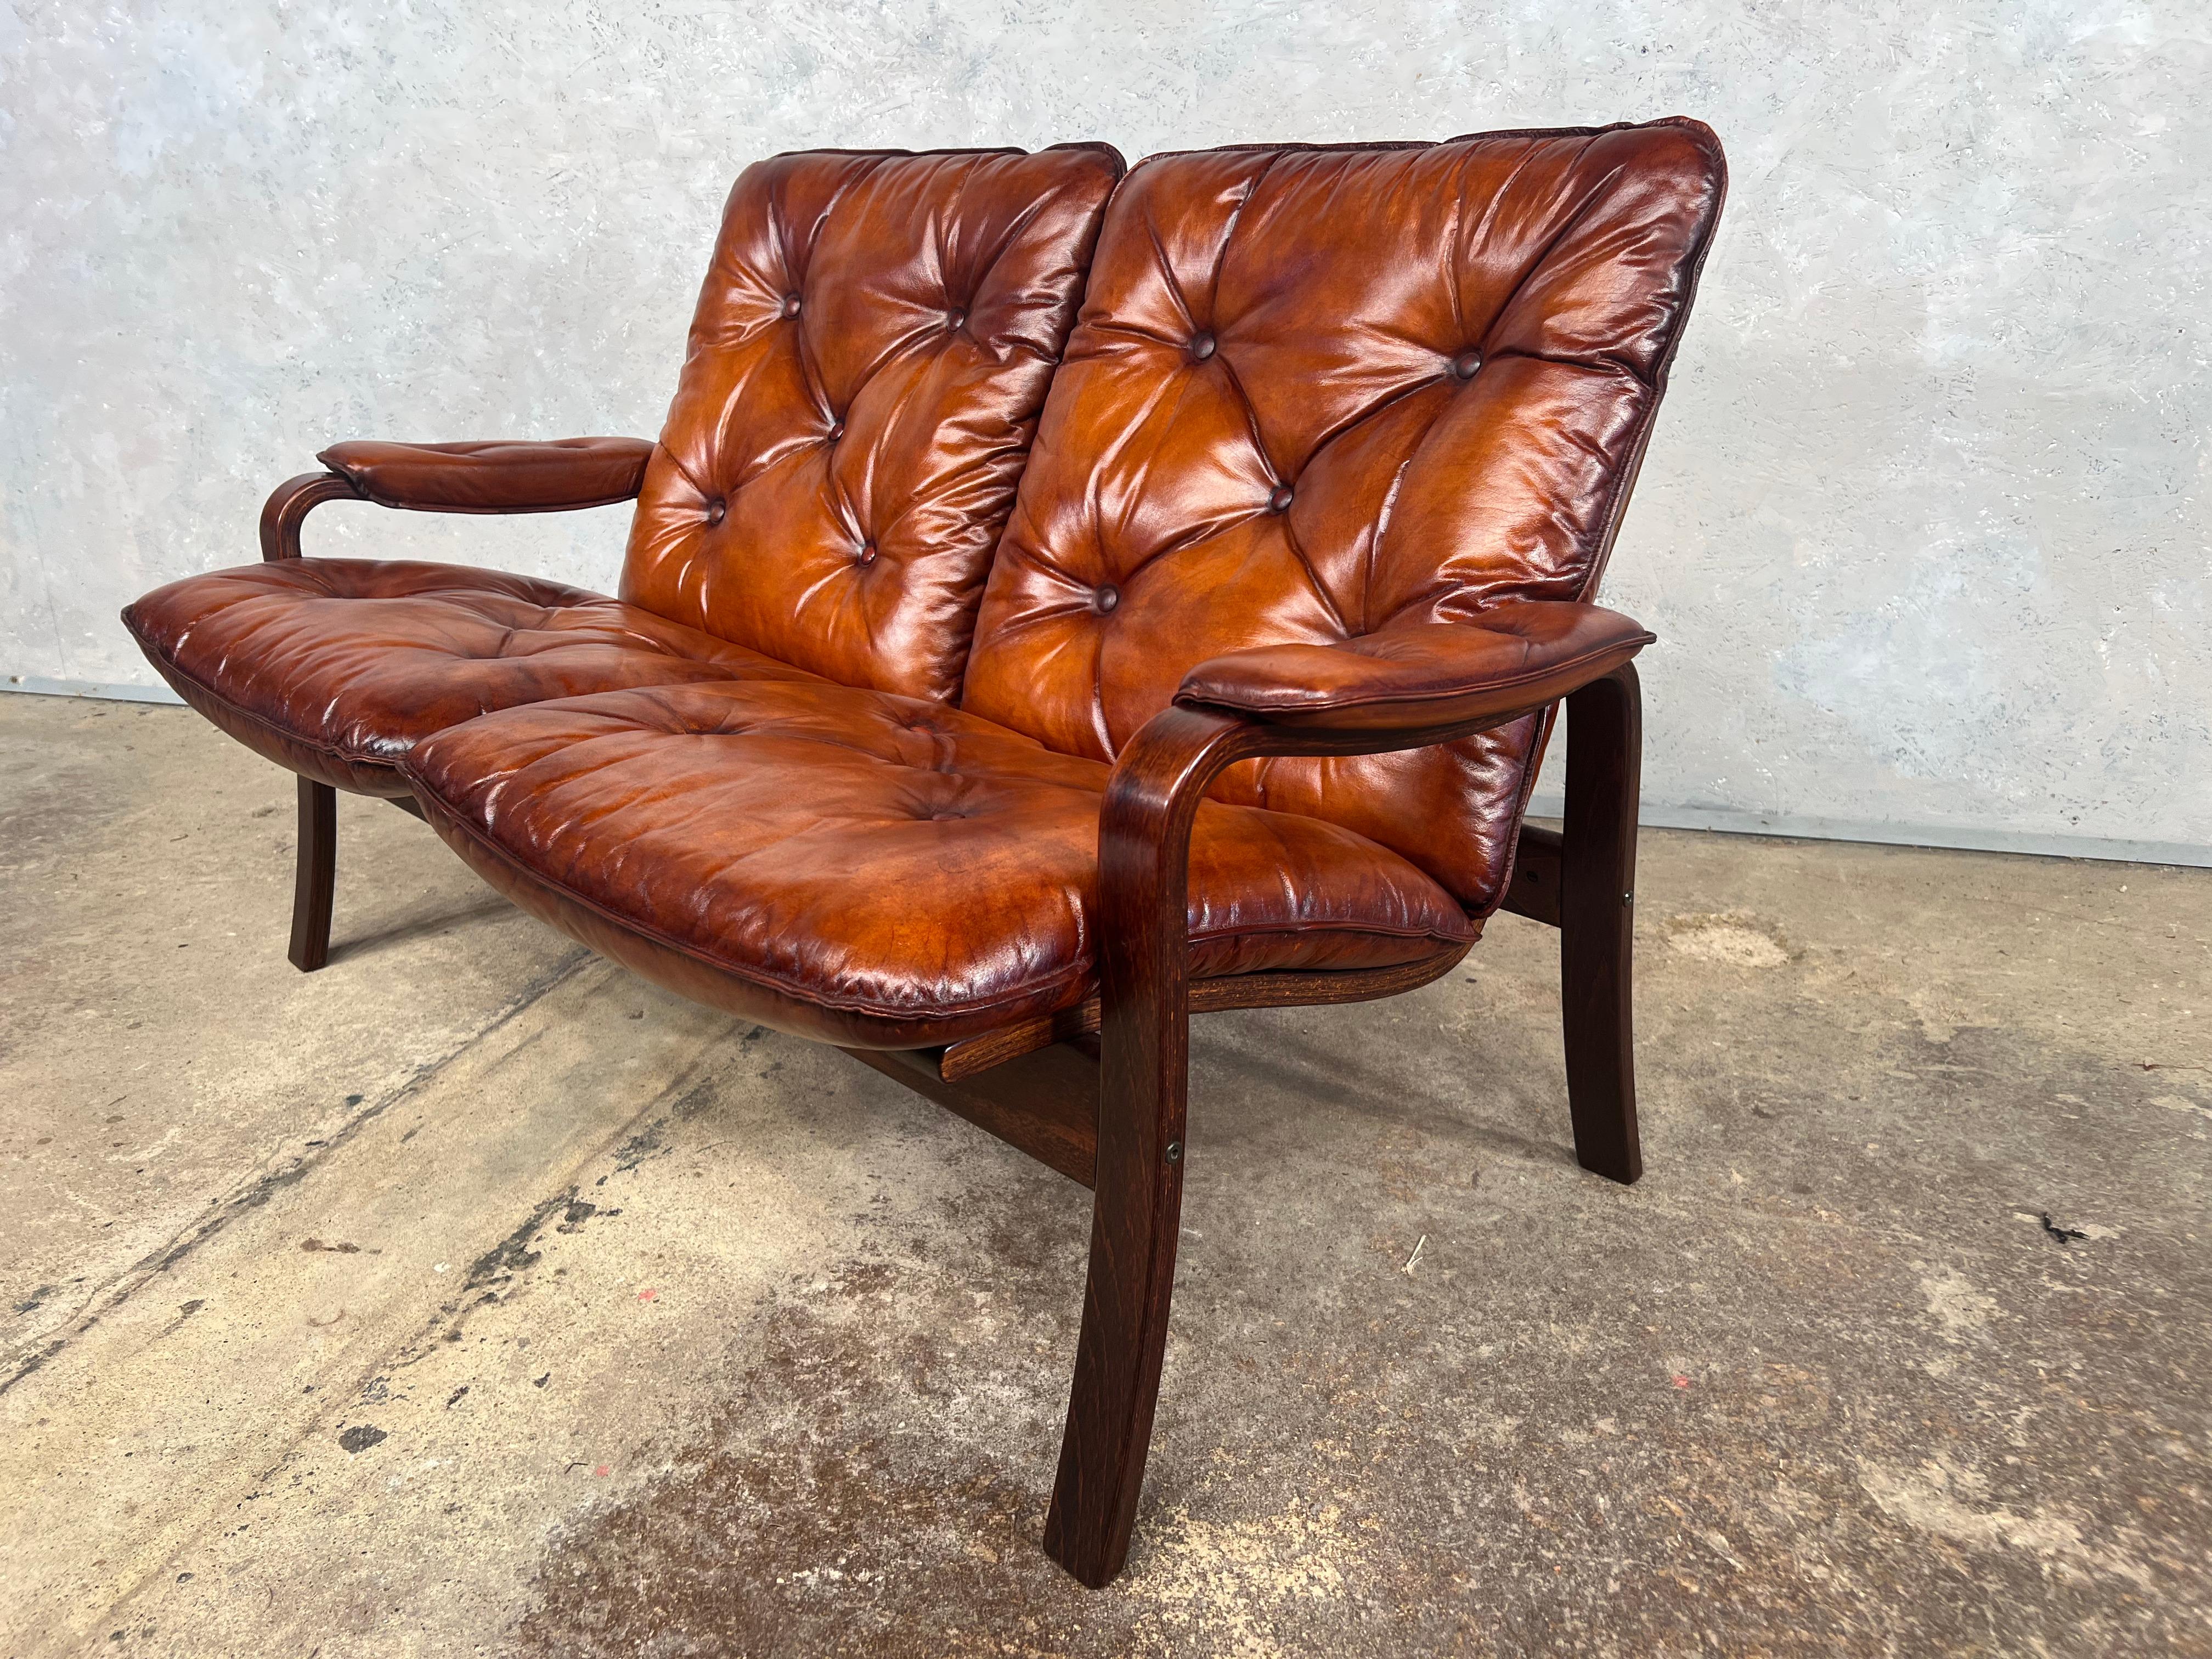 Neat Vintage Danish 1970 Two Seater Bentwood Leather Sofa Hand Dyed Cognac #548 For Sale 1